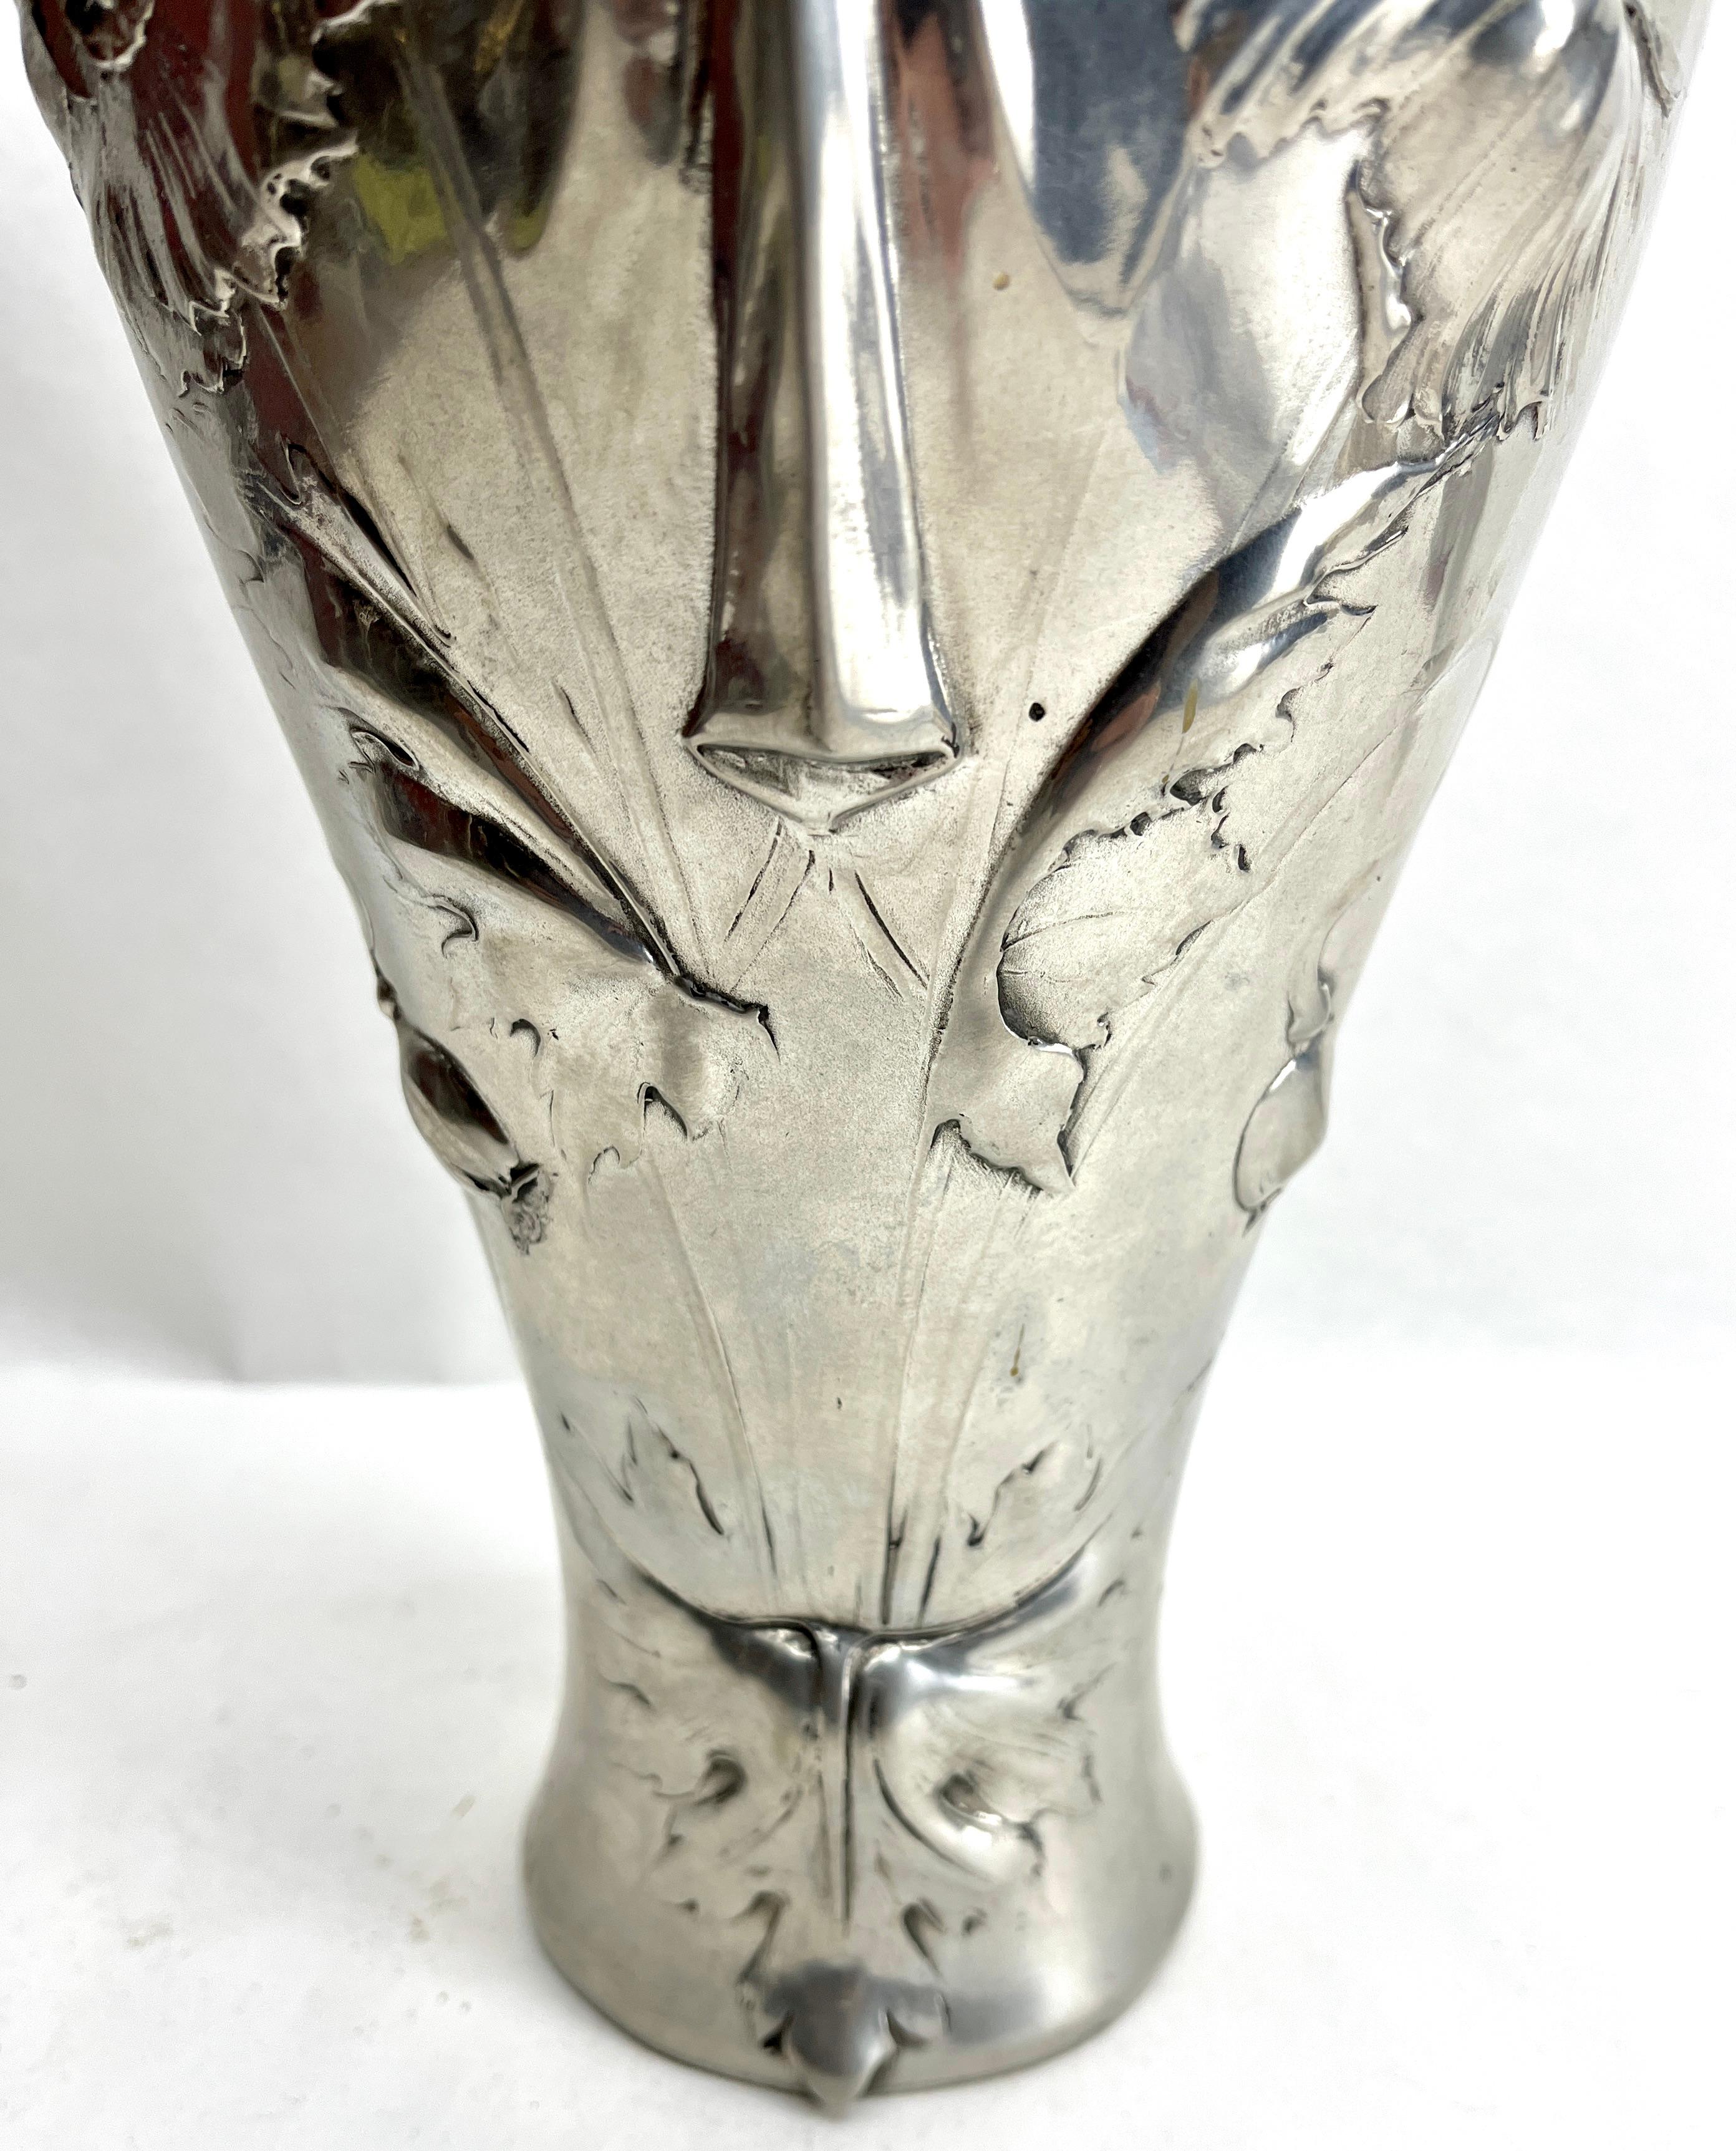 Early 20th Century Art Nouveau Large Richly Decorated Vase with Flowers and Female Figure. For Sale